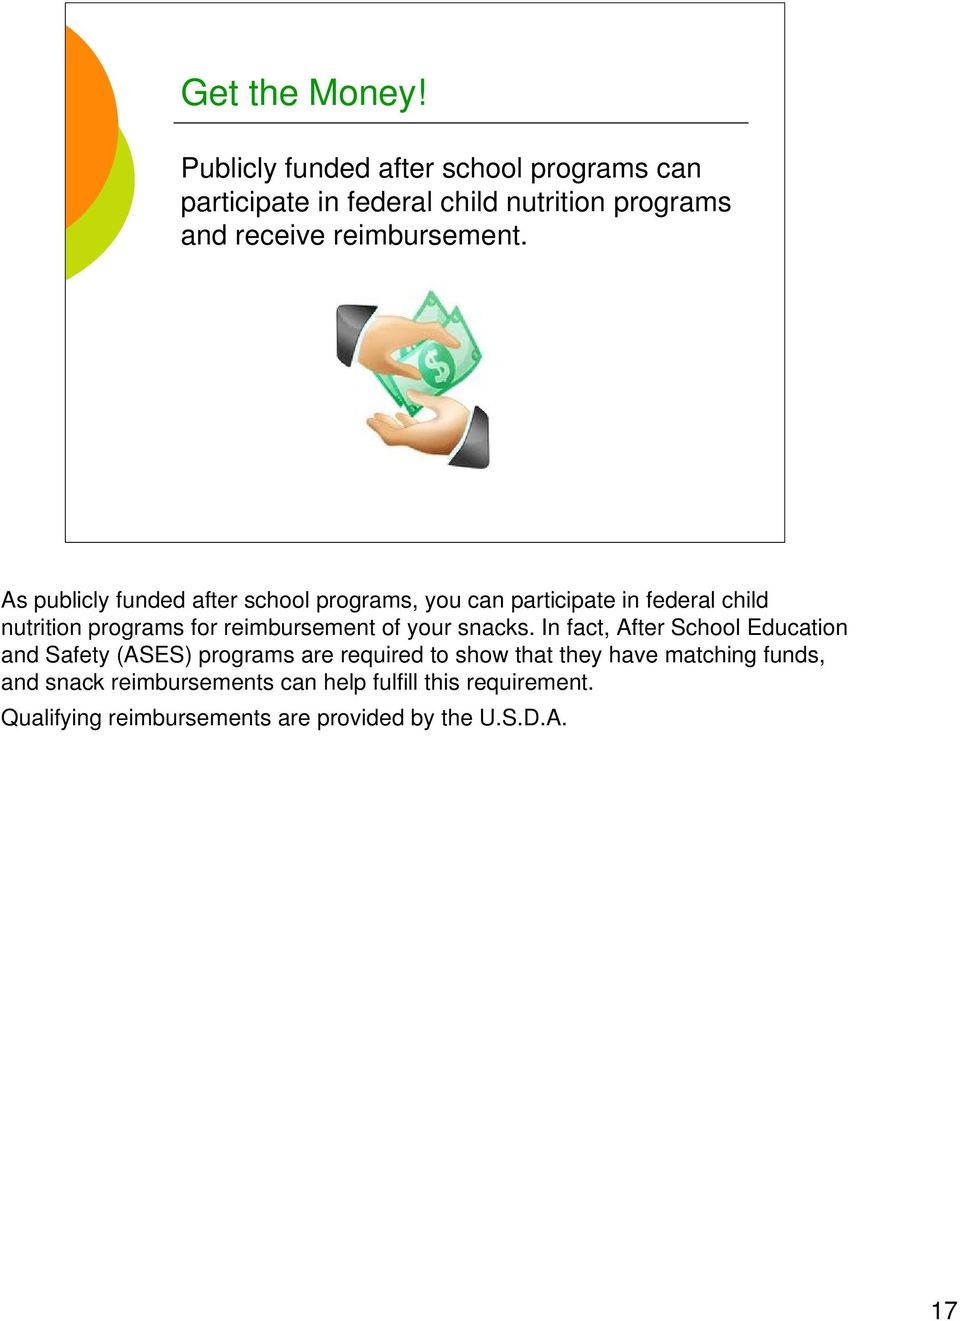 As publicly funded after school programs, you can participate in federal child nutrition programs for reimbursement of